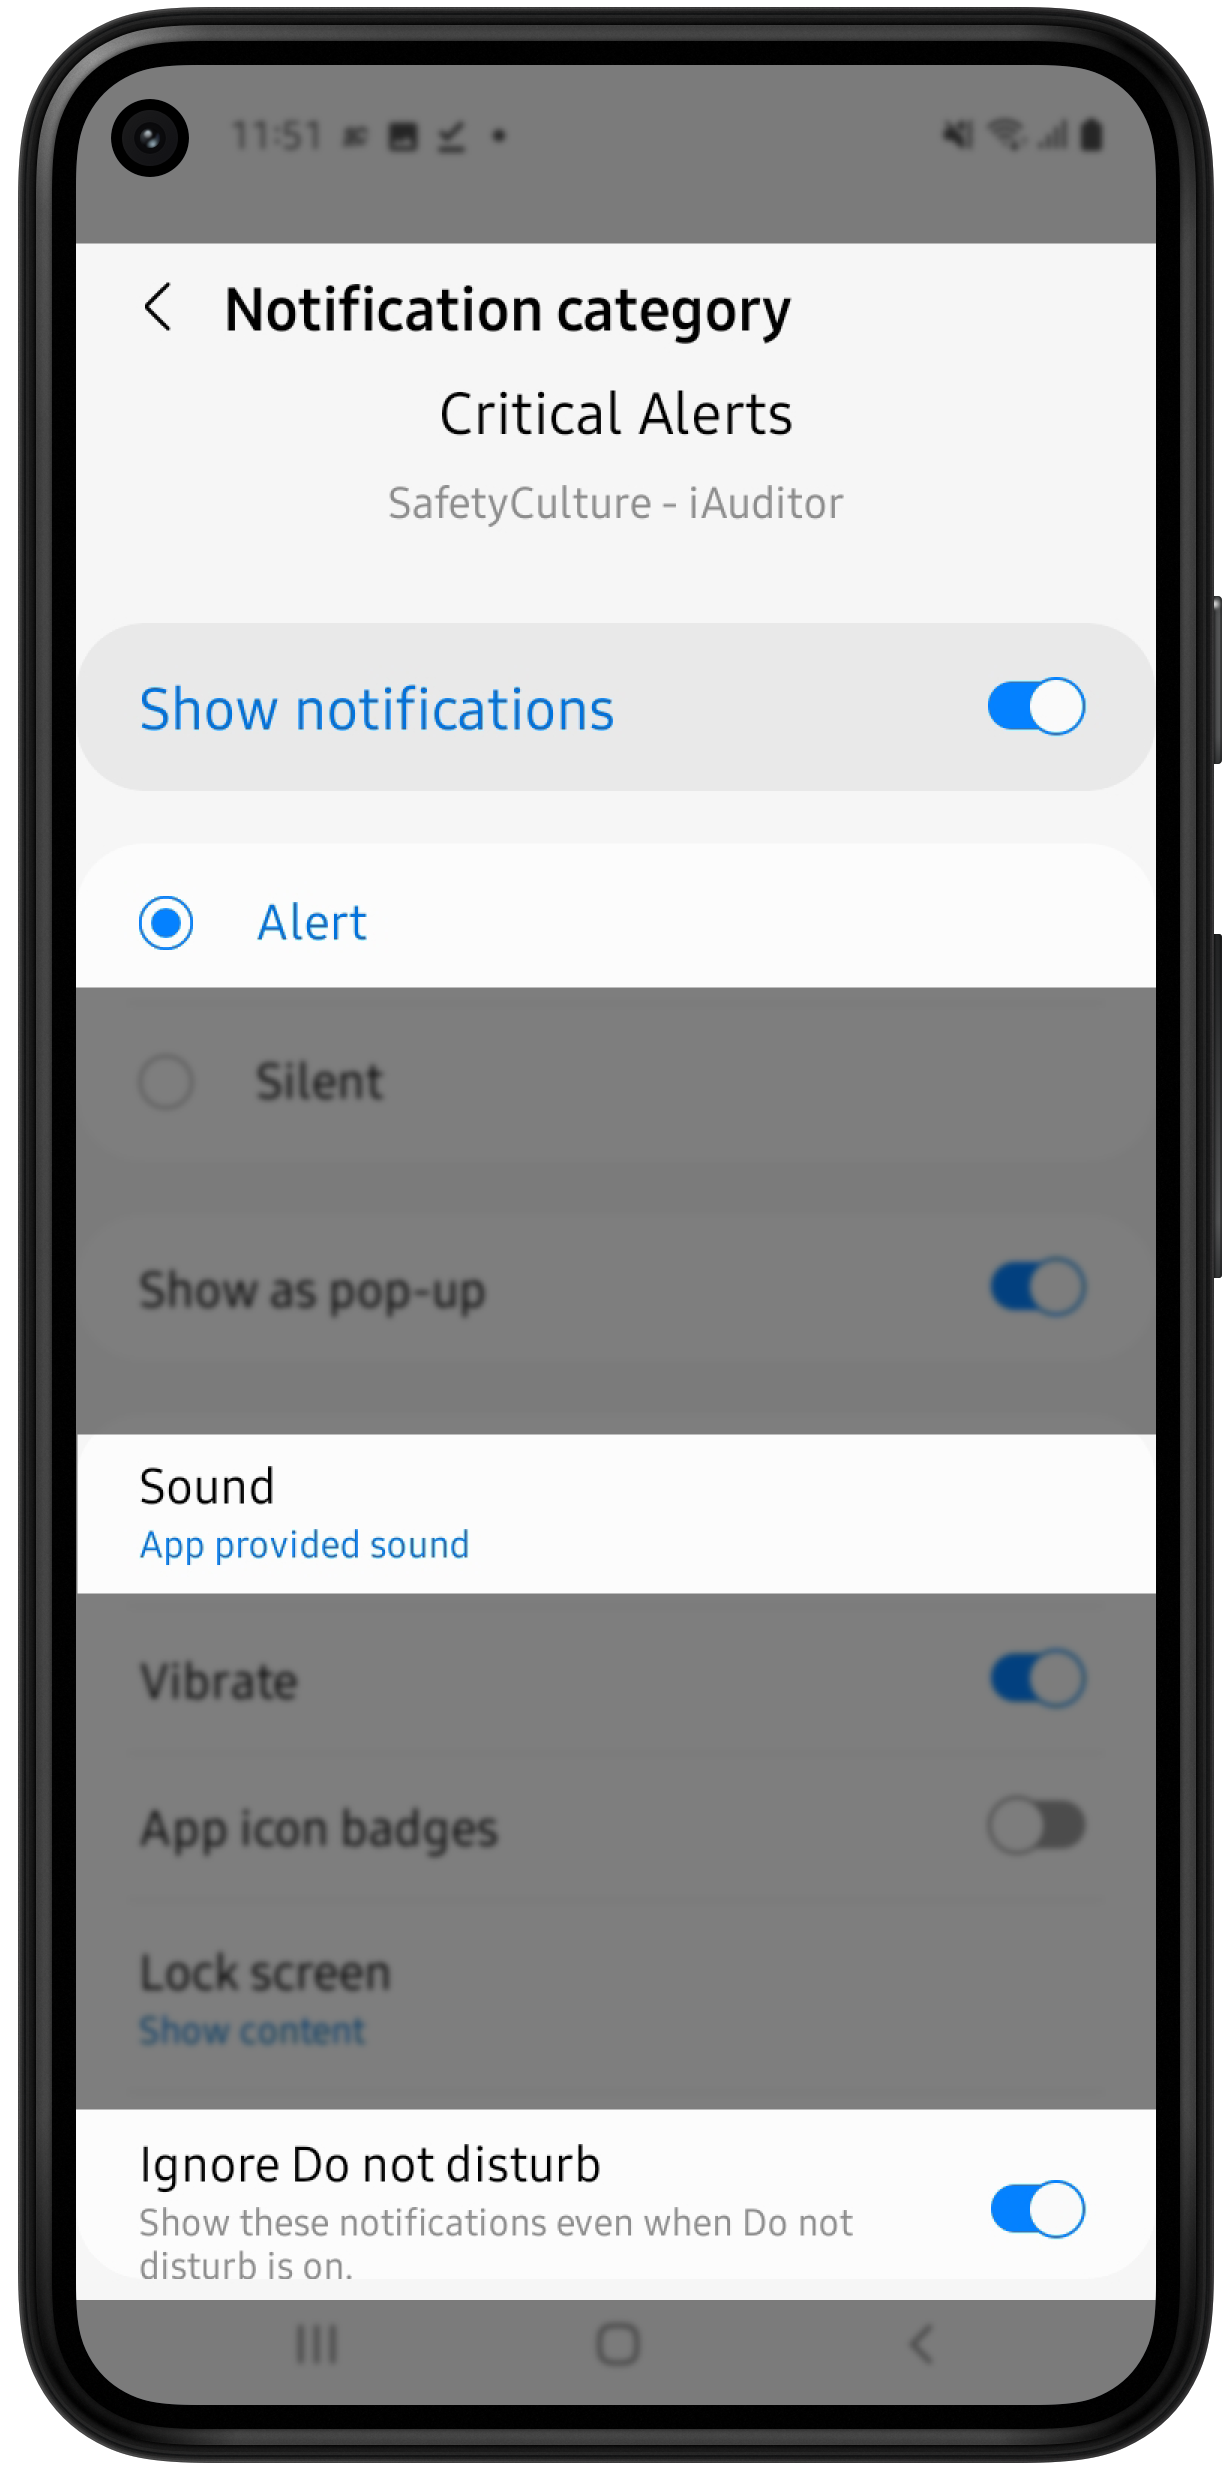 Enable or disable Critical Alerts via Android device settings.